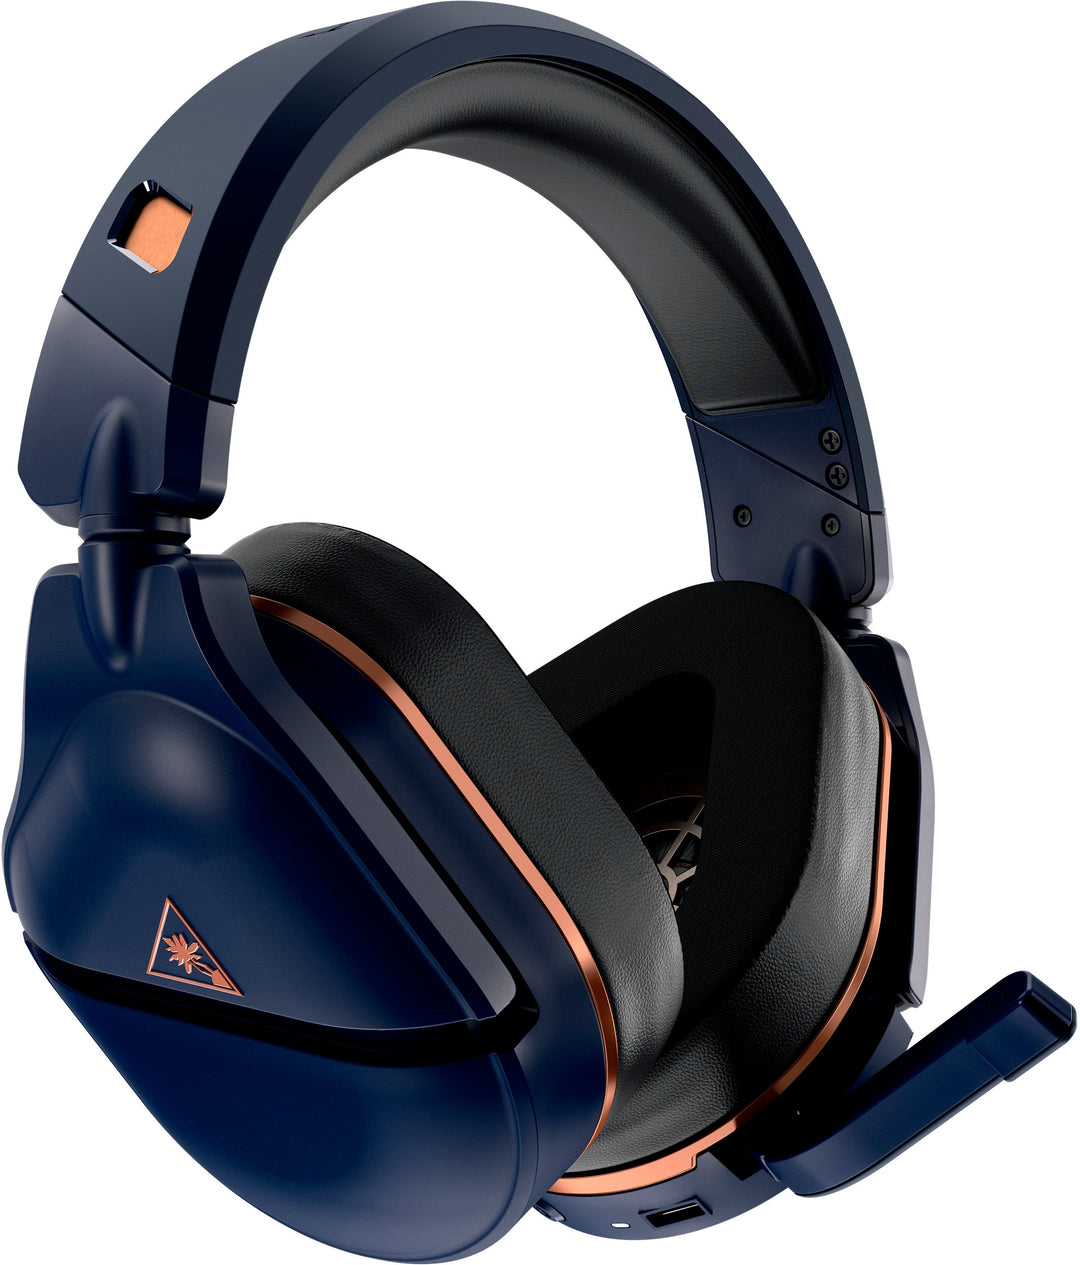 Turtle Beach - Stealth 700 Gen 2 MAX PS Wireless Multiplatform Gaming Headset for PS5, PS4, Nintendo Switch, PC - 40+ Hour Battery - Cobalt Blue_2